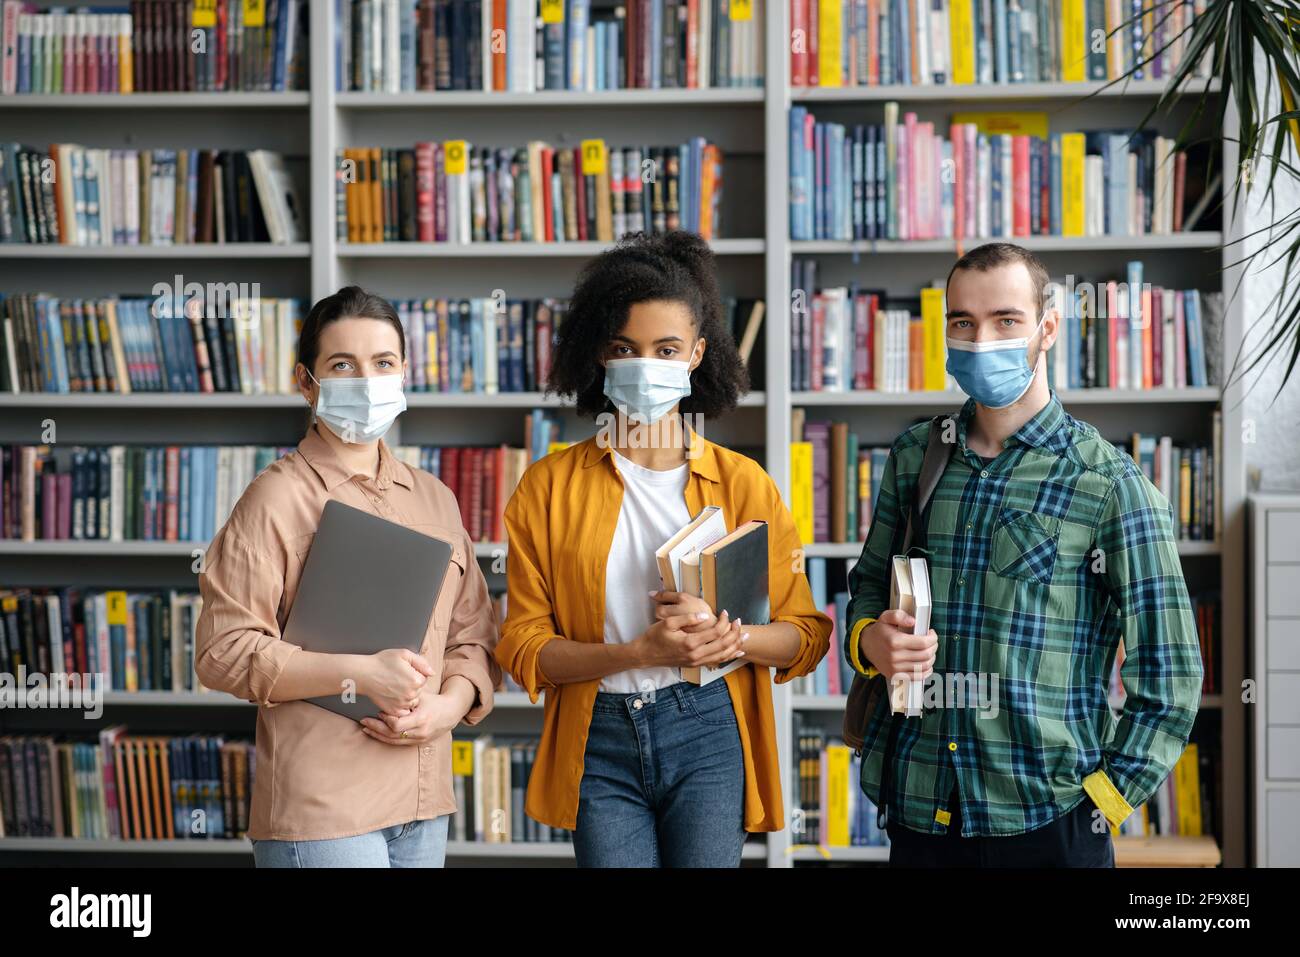 Education, student life, friendship. Multinational students friends, standing in the university library, wearing protective medical masks due to the coronavirus pandemic, looking at the camera Stock Photo